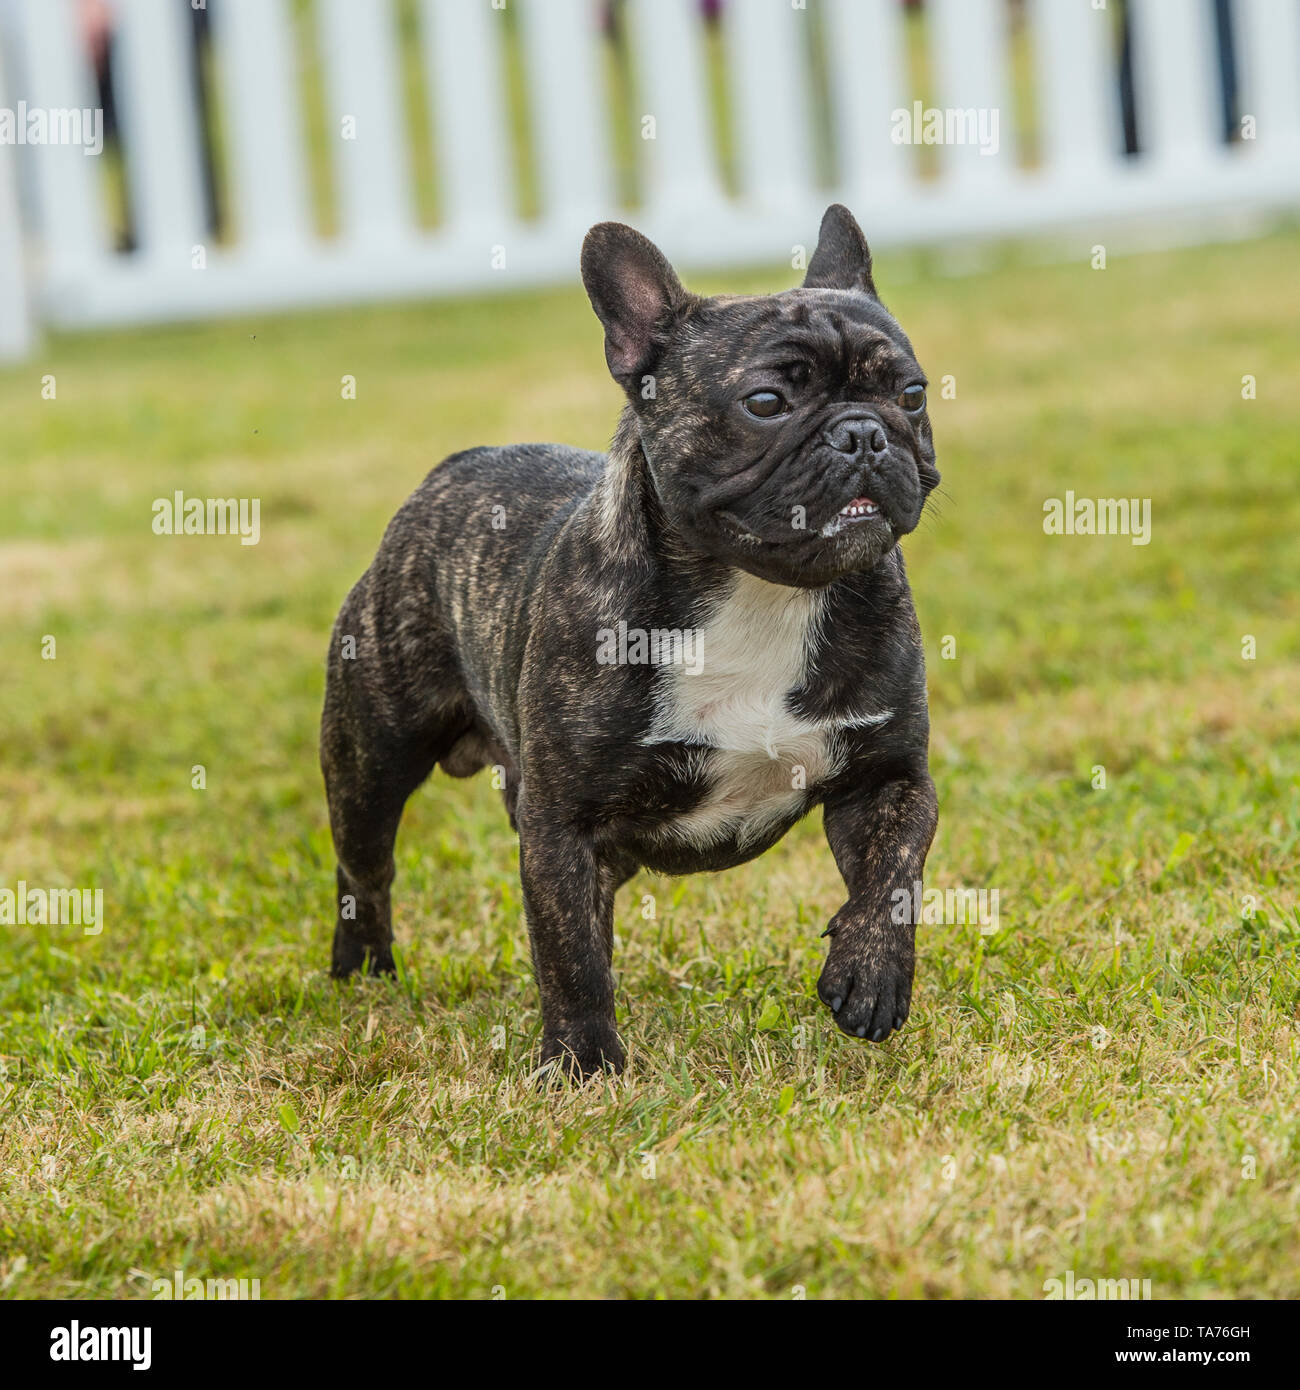 Brindle french bulldog High Resolution Stock Photography and Images - Alamy